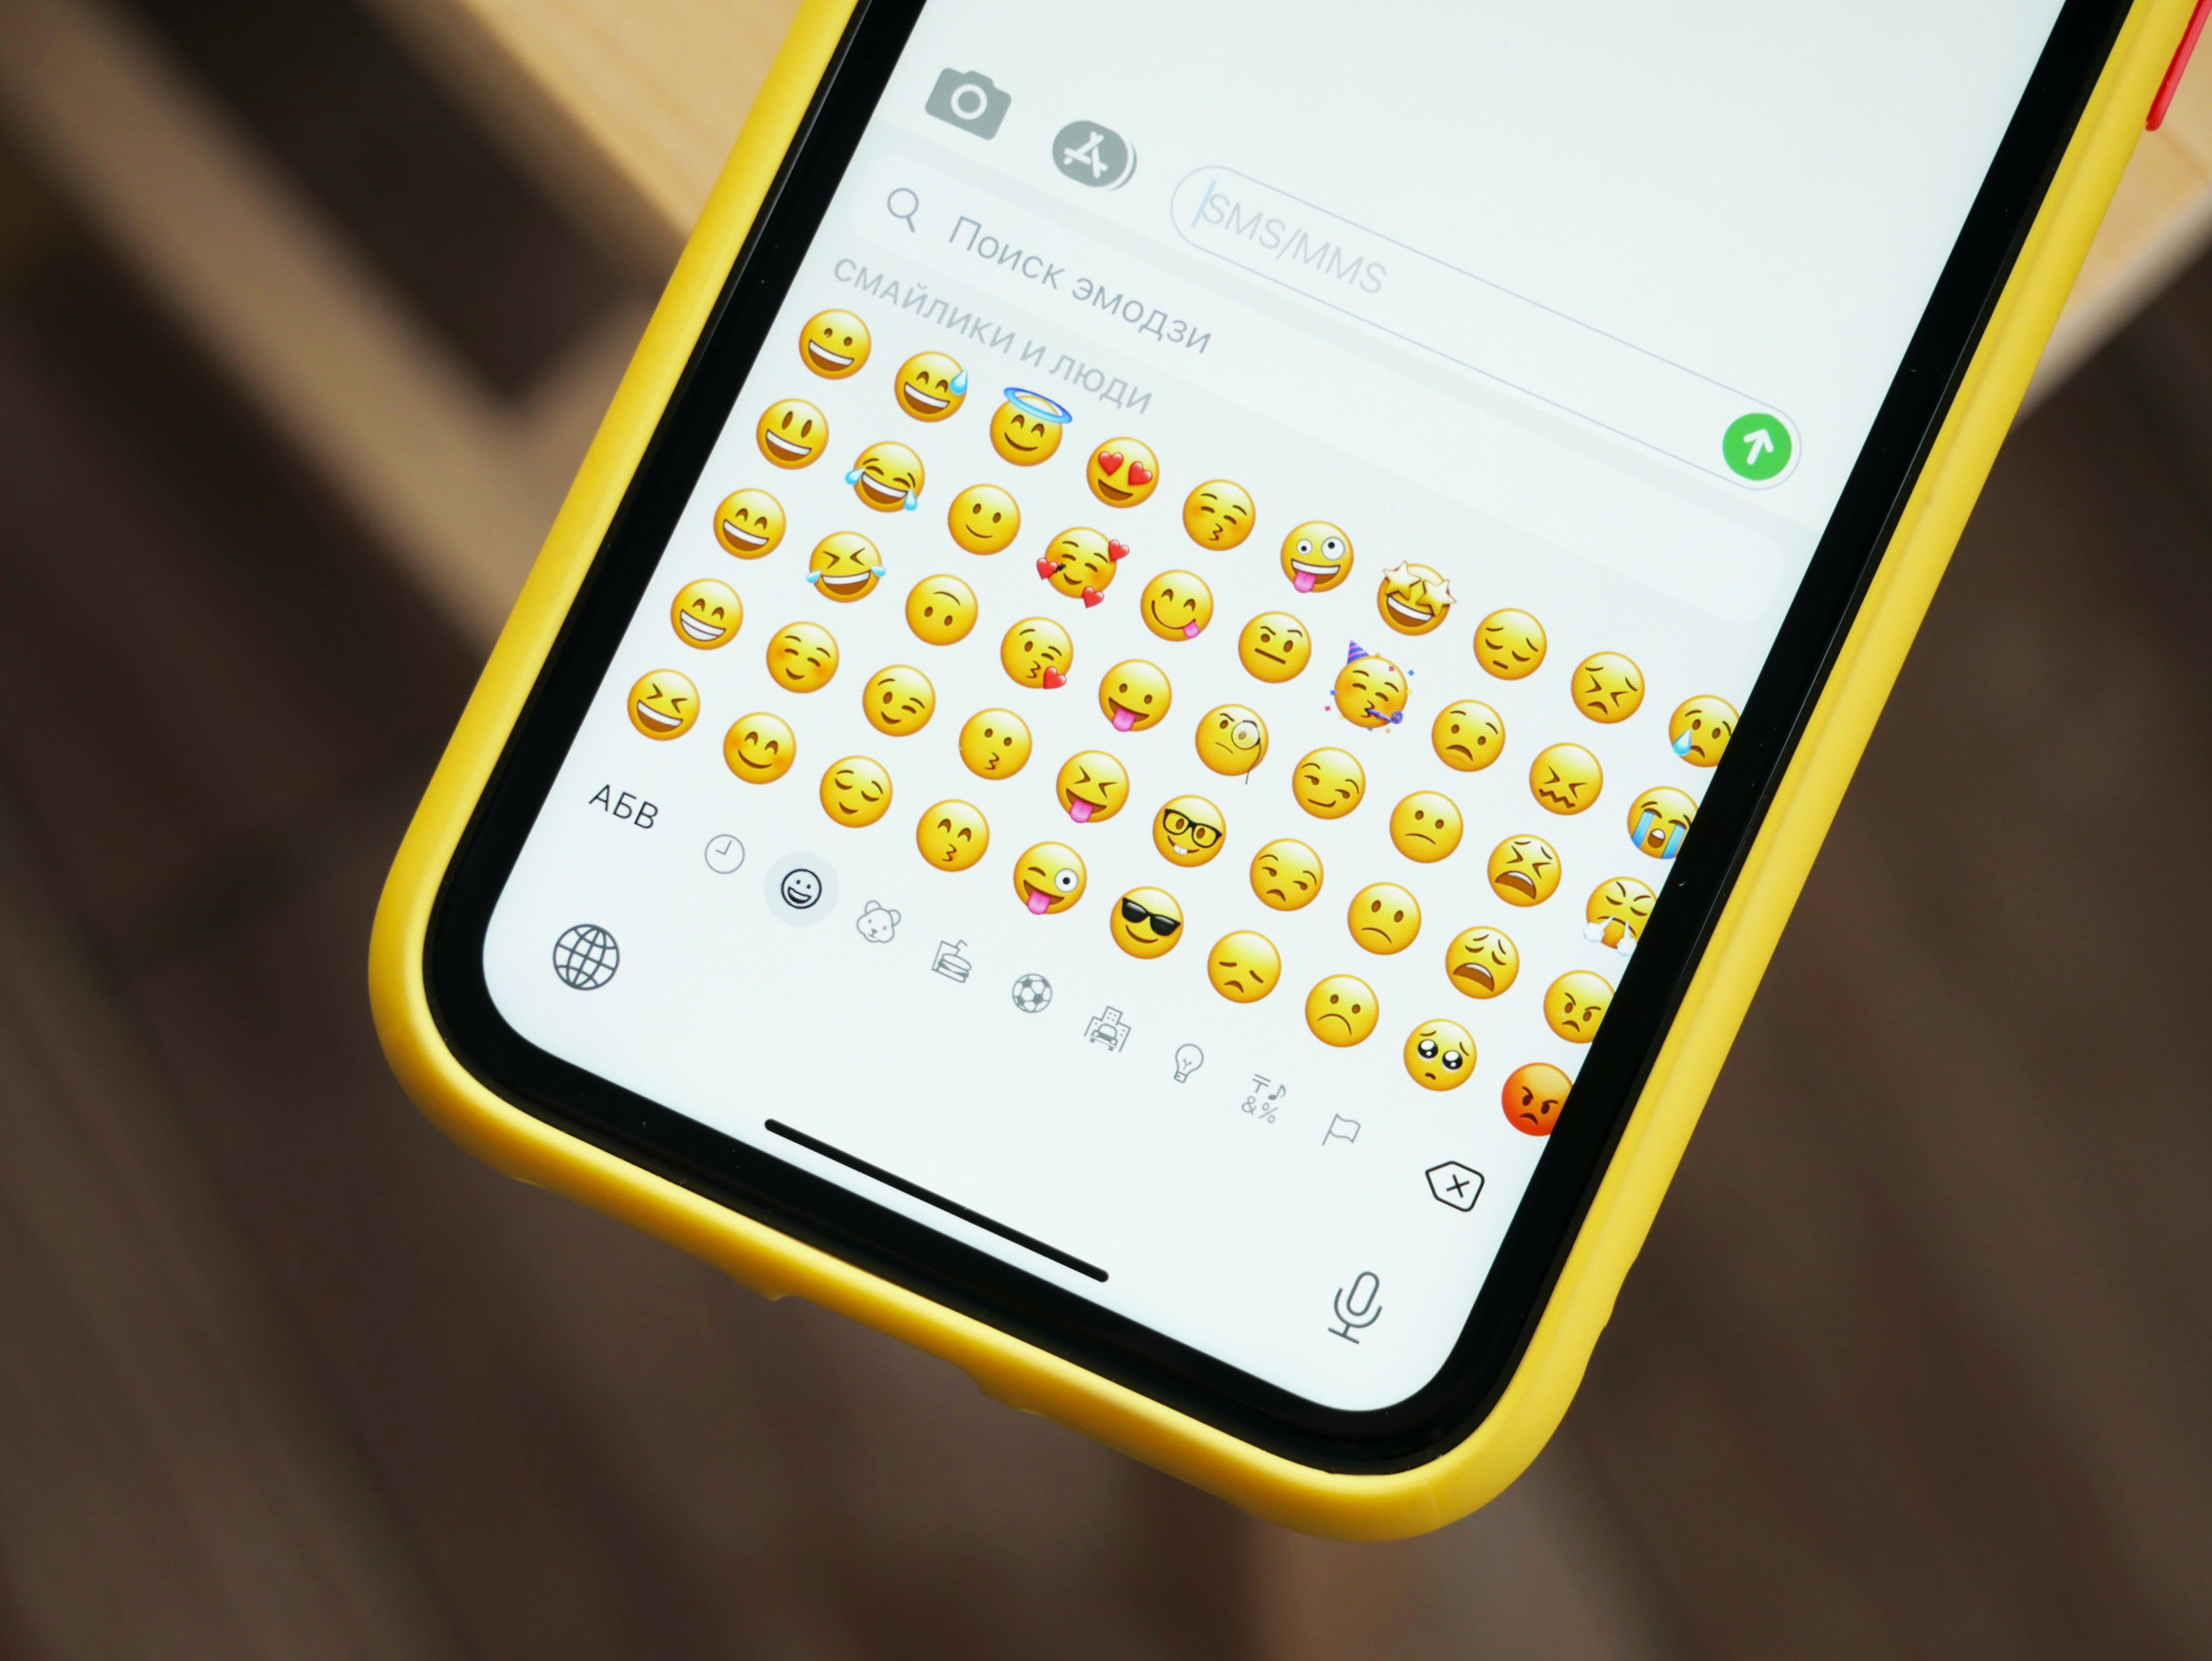 A picture is worth a thousand words – but what about an emoji? 